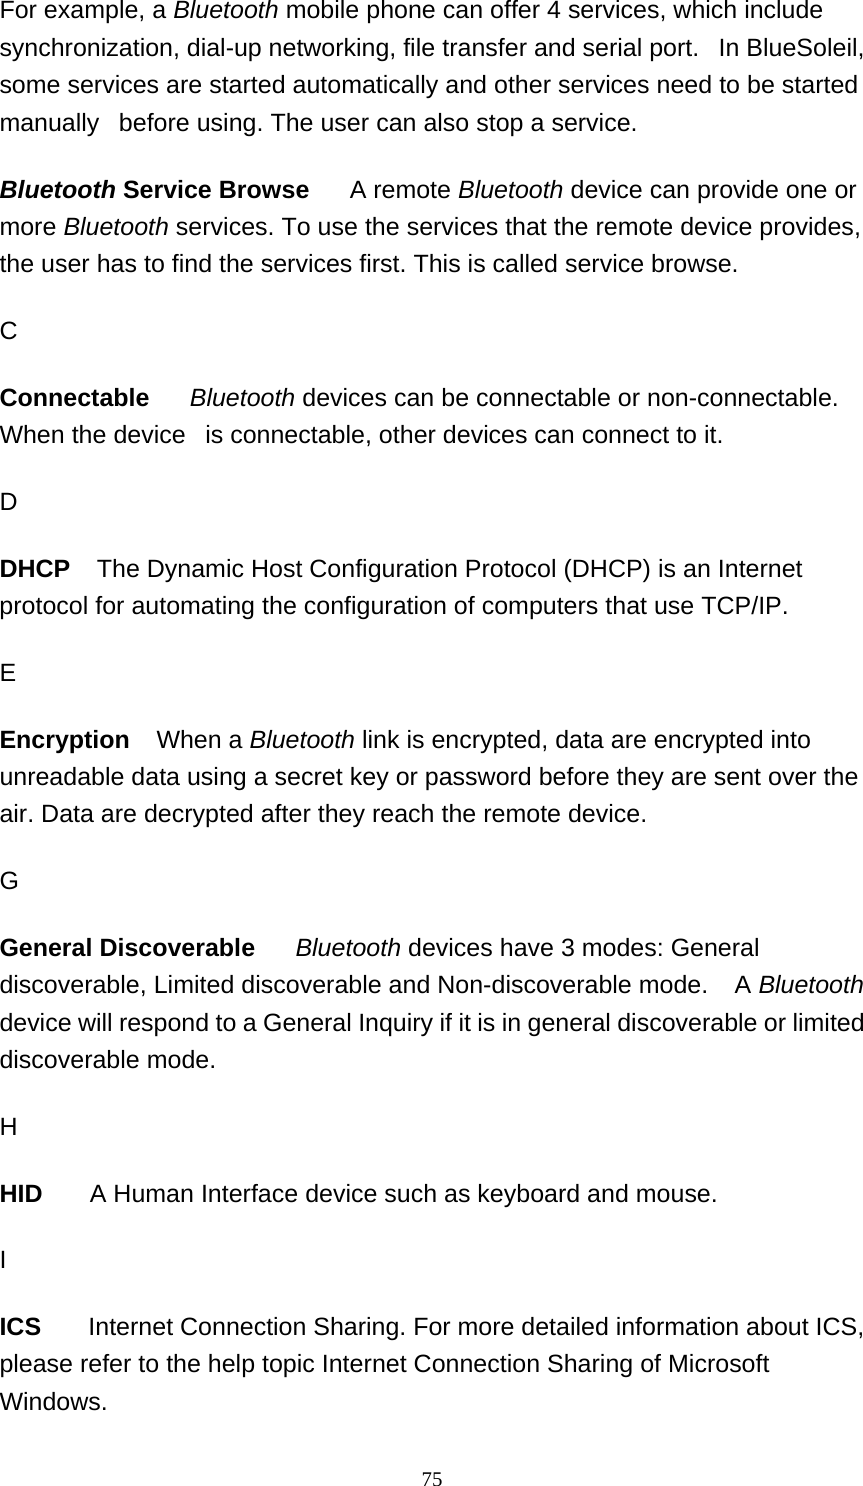   75For example, a Bluetooth mobile phone can offer 4 services, which include synchronization, dial-up networking, file transfer and serial port.   In BlueSoleil, some services are started automatically and other services need to be started manually   before using. The user can also stop a service.  Bluetooth Service Browse     A remote Bluetooth device can provide one or more Bluetooth services. To use the services that the remote device provides, the user has to find the services first. This is called service browse.  C Connectable     Bluetooth devices can be connectable or non-connectable. When the device   is connectable, other devices can connect to it.  D DHCP   The Dynamic Host Configuration Protocol (DHCP) is an Internet protocol for automating the configuration of computers that use TCP/IP. E Encryption    When a Bluetooth link is encrypted, data are encrypted into unreadable data using a secret key or password before they are sent over the air. Data are decrypted after they reach the remote device.    G General Discoverable     Bluetooth devices have 3 modes: General discoverable, Limited discoverable and Non-discoverable mode.    A Bluetooth device will respond to a General Inquiry if it is in general discoverable or limited discoverable mode.  H HID       A Human Interface device such as keyboard and mouse.  I ICS       Internet Connection Sharing. For more detailed information about ICS, please refer to the help topic Internet Connection Sharing of Microsoft Windows. 